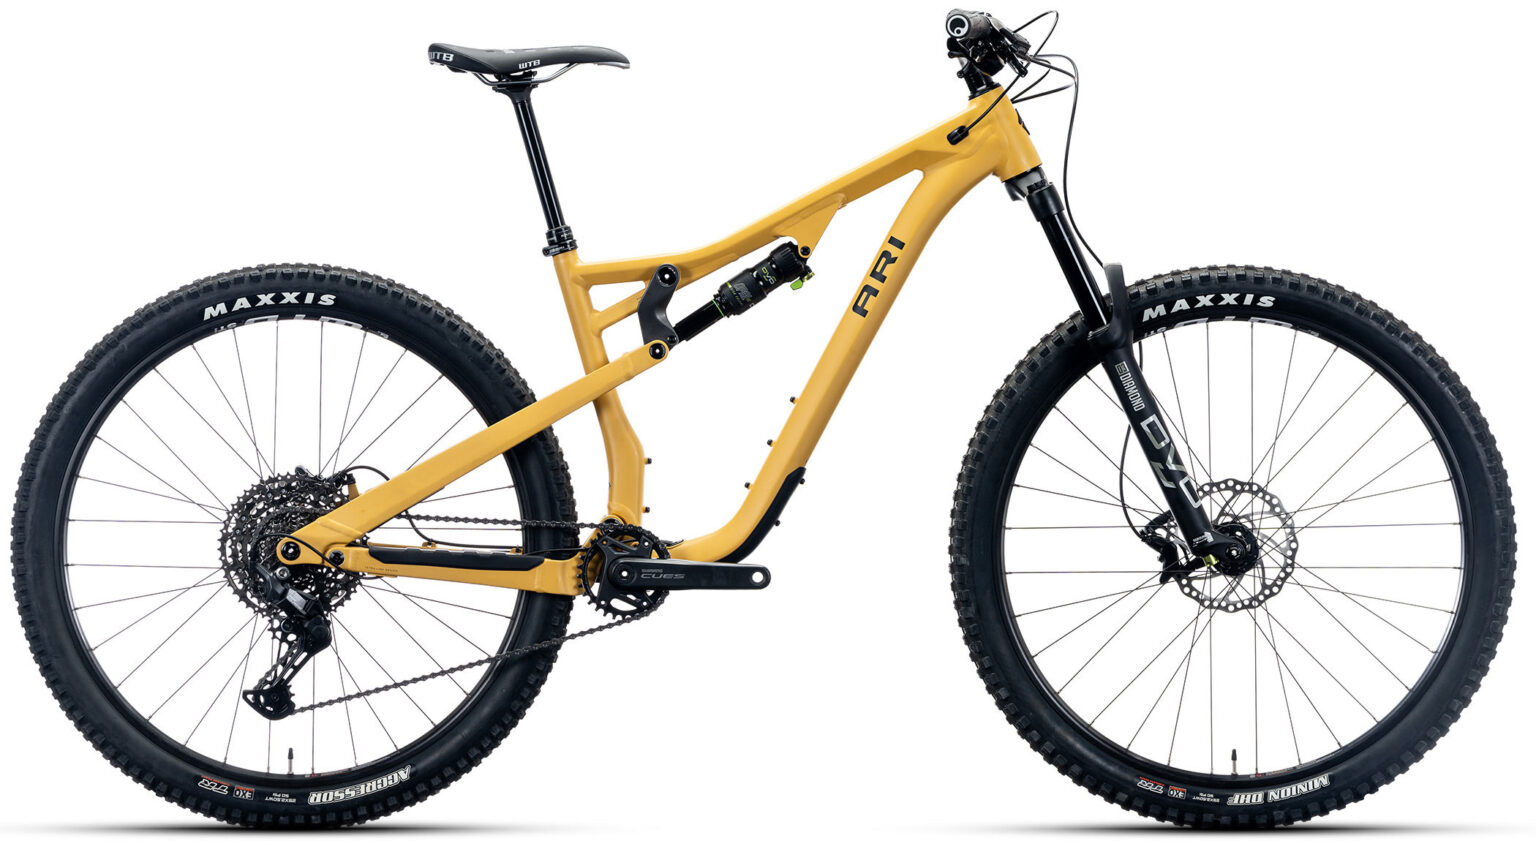 ari cascade alloy trail bike shown from the side in mustard yellow color